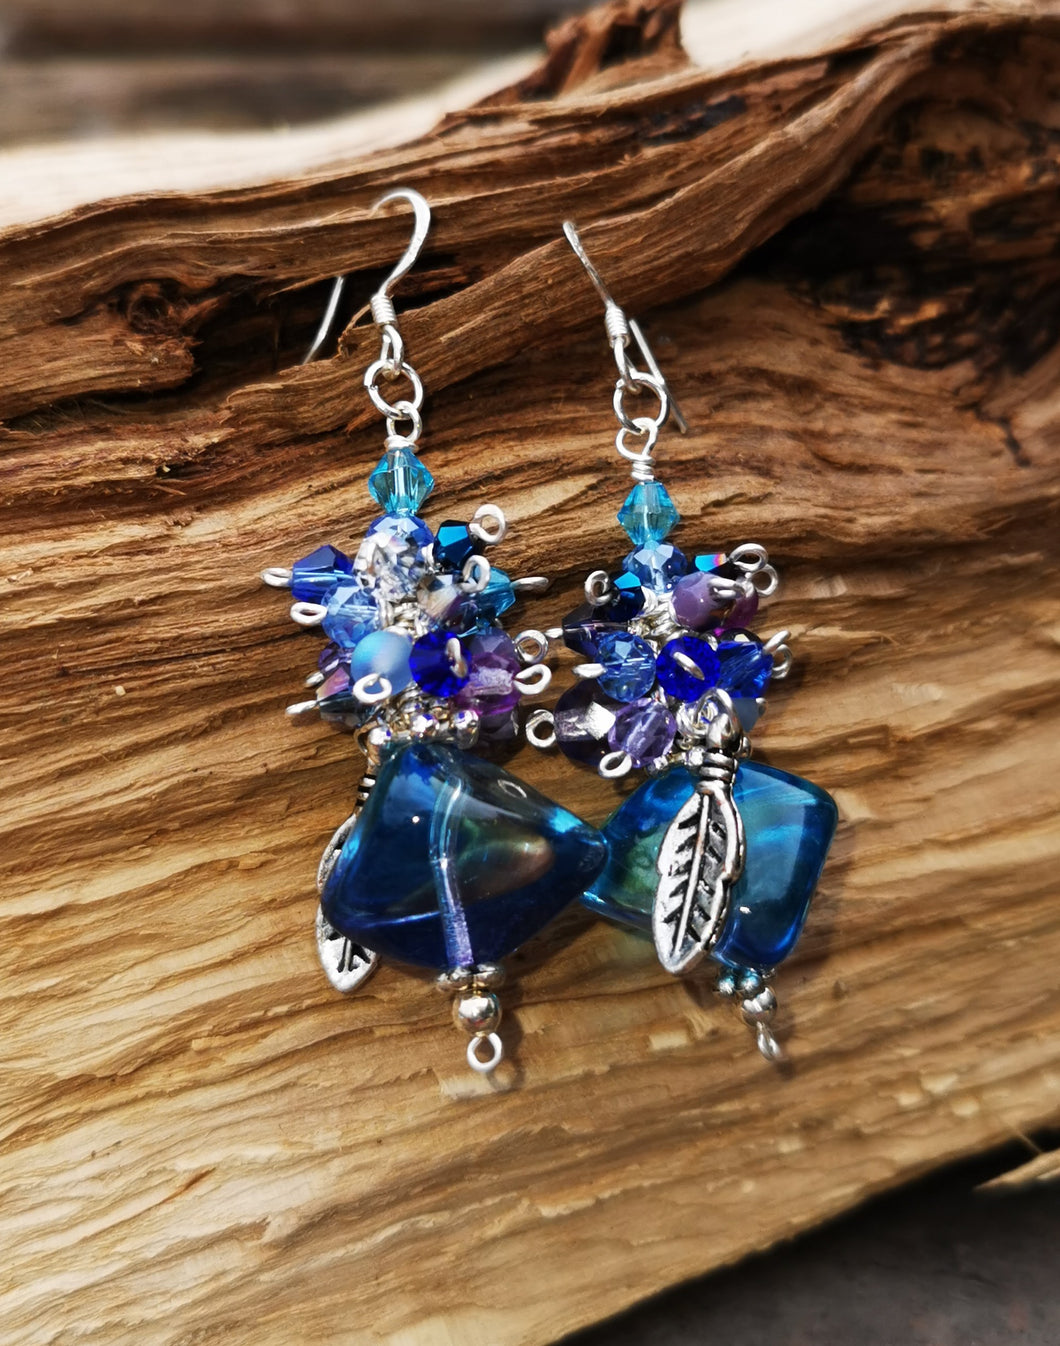 Rain Drops, gorgeous earrings with two toned blue nugget beads with crystals and charms on 925 silver earwires